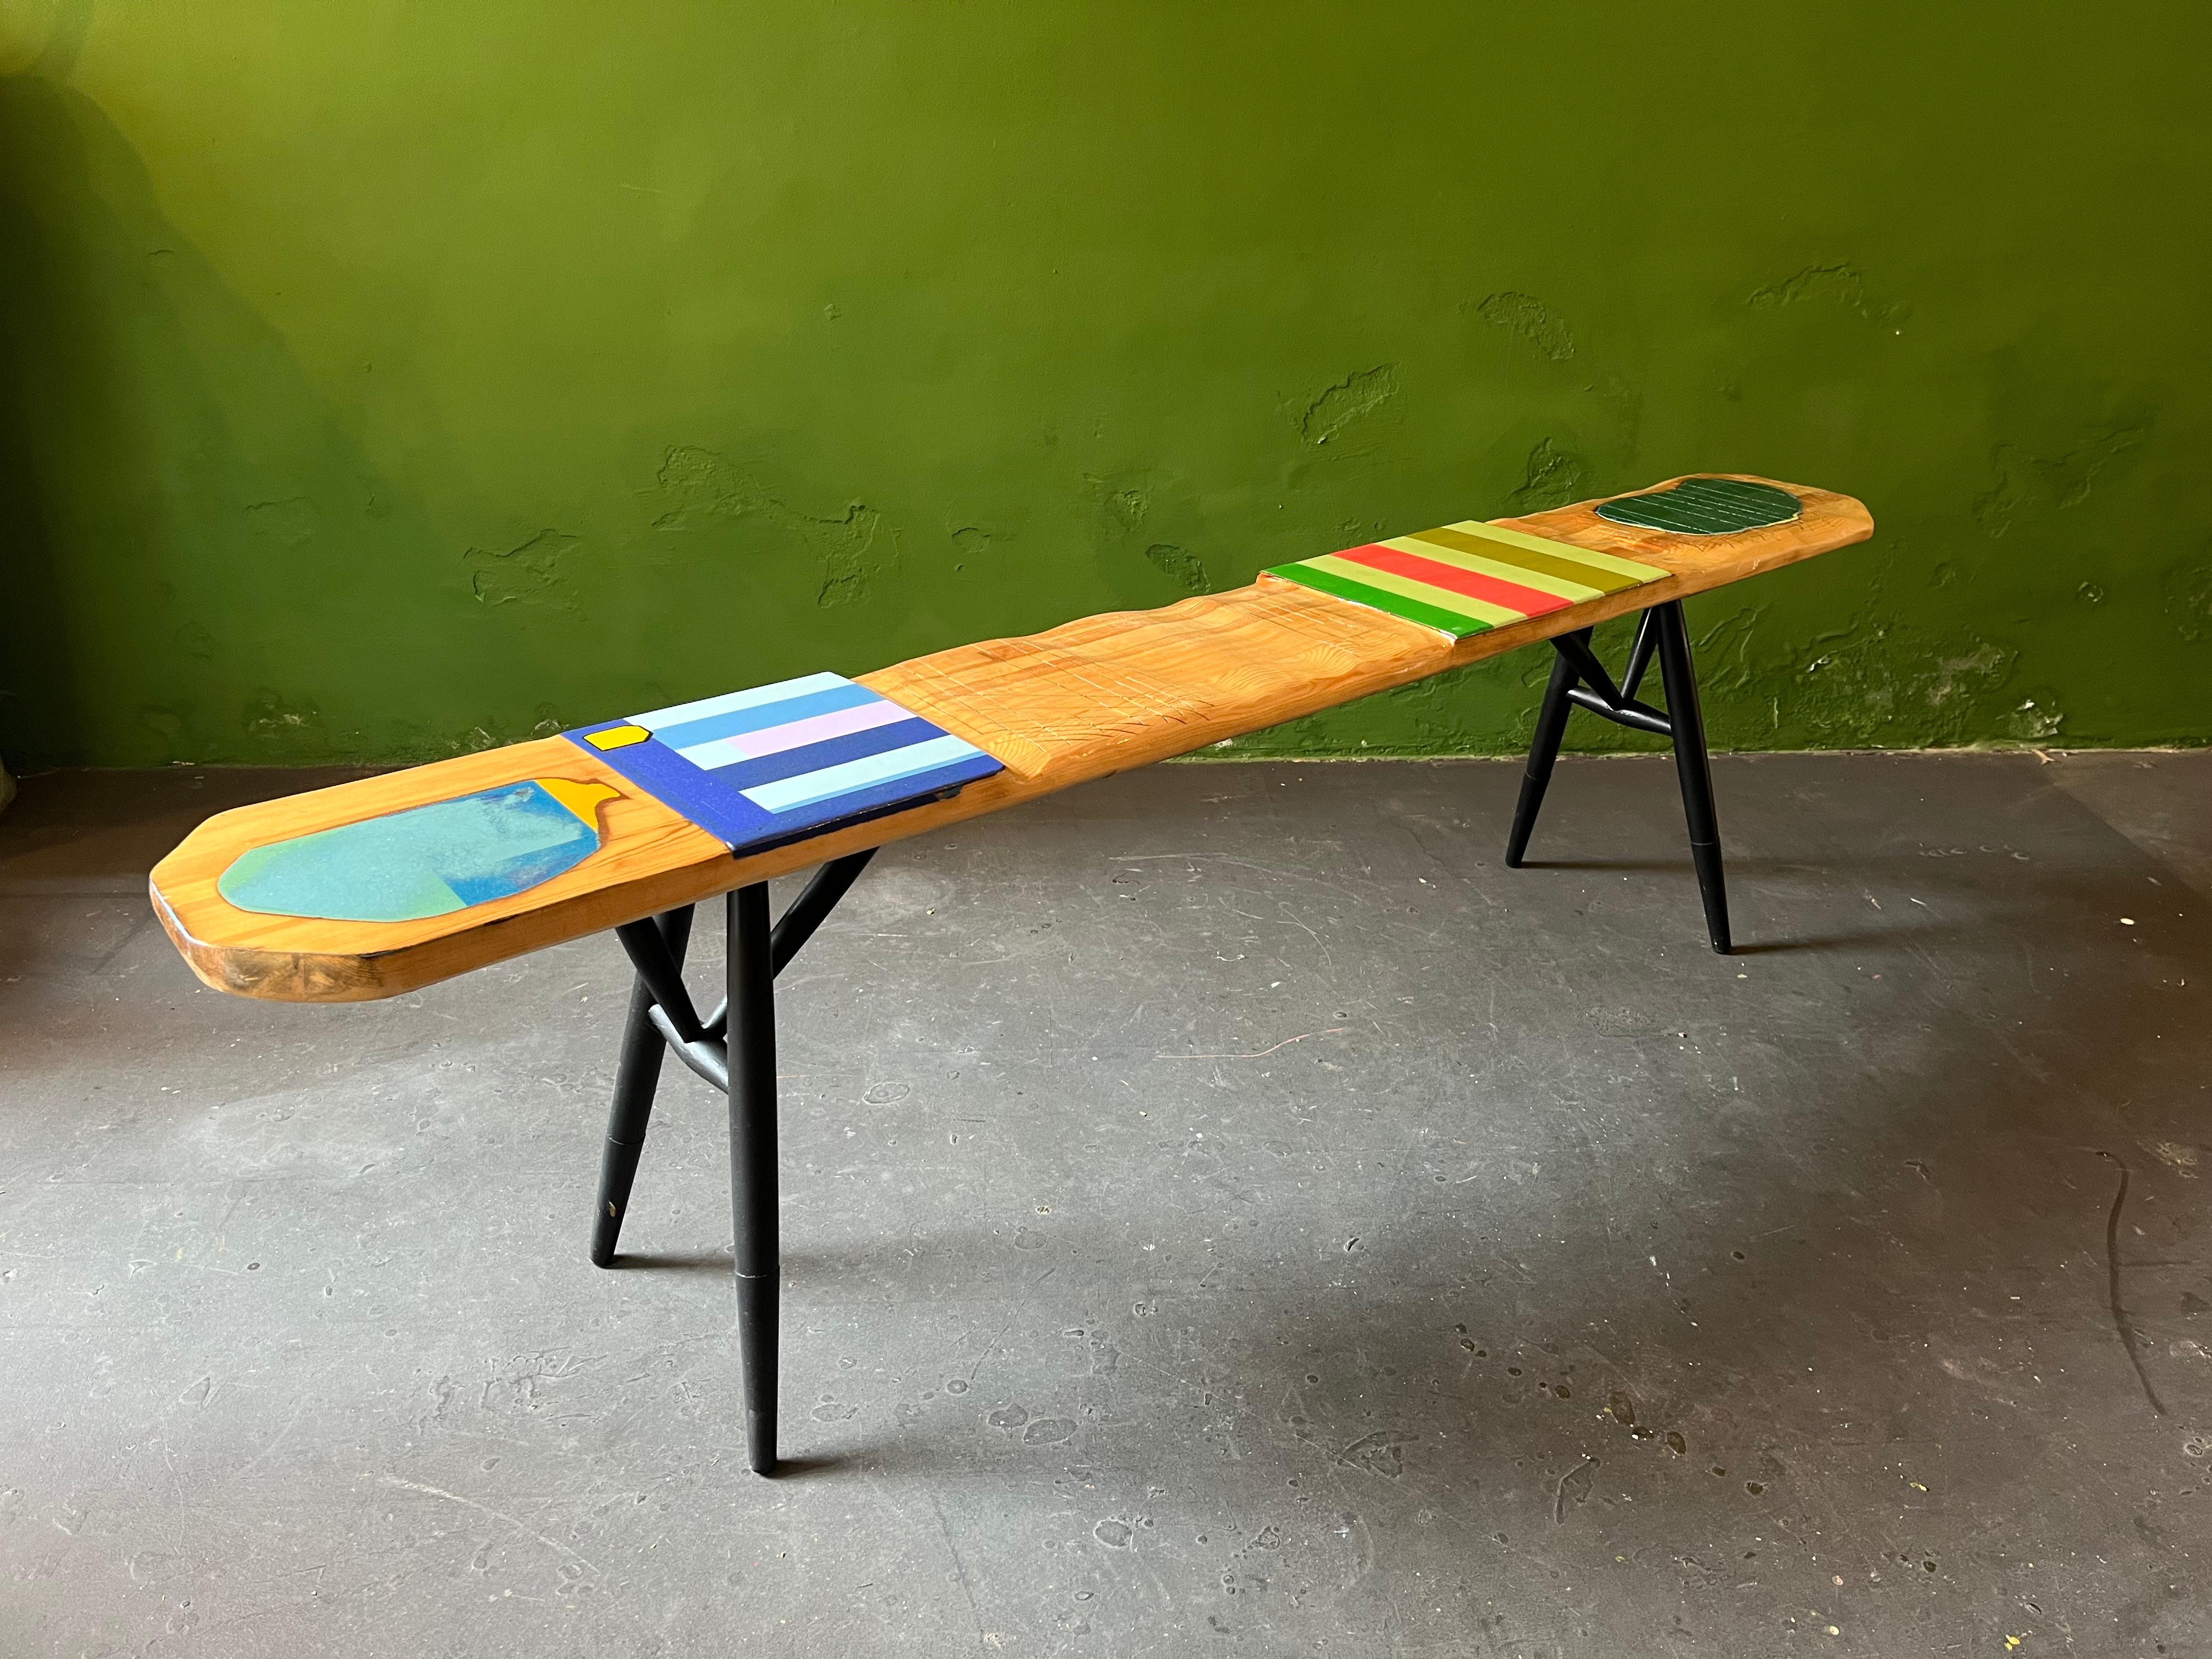 Tapiovaara classic contemporized, re-shaped, painted and lacquered by Markus Friedrich Staab. The bench was highered because of its original hights of only 40cm, now it has a common hights because of extra metalfeet that has been added.

Through